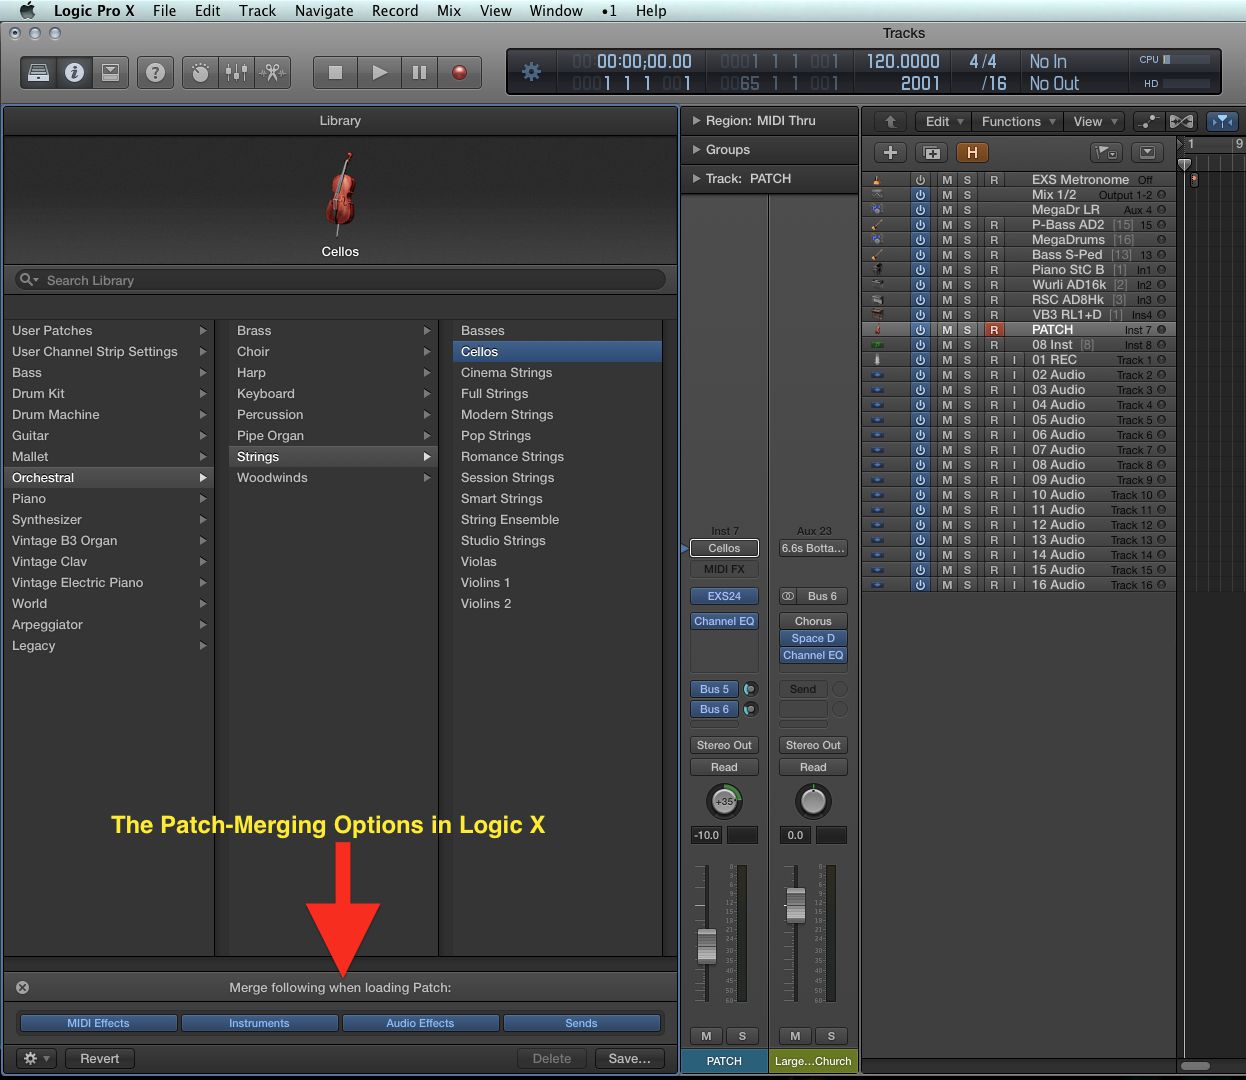 The Patch-Merging Options in Logic X.